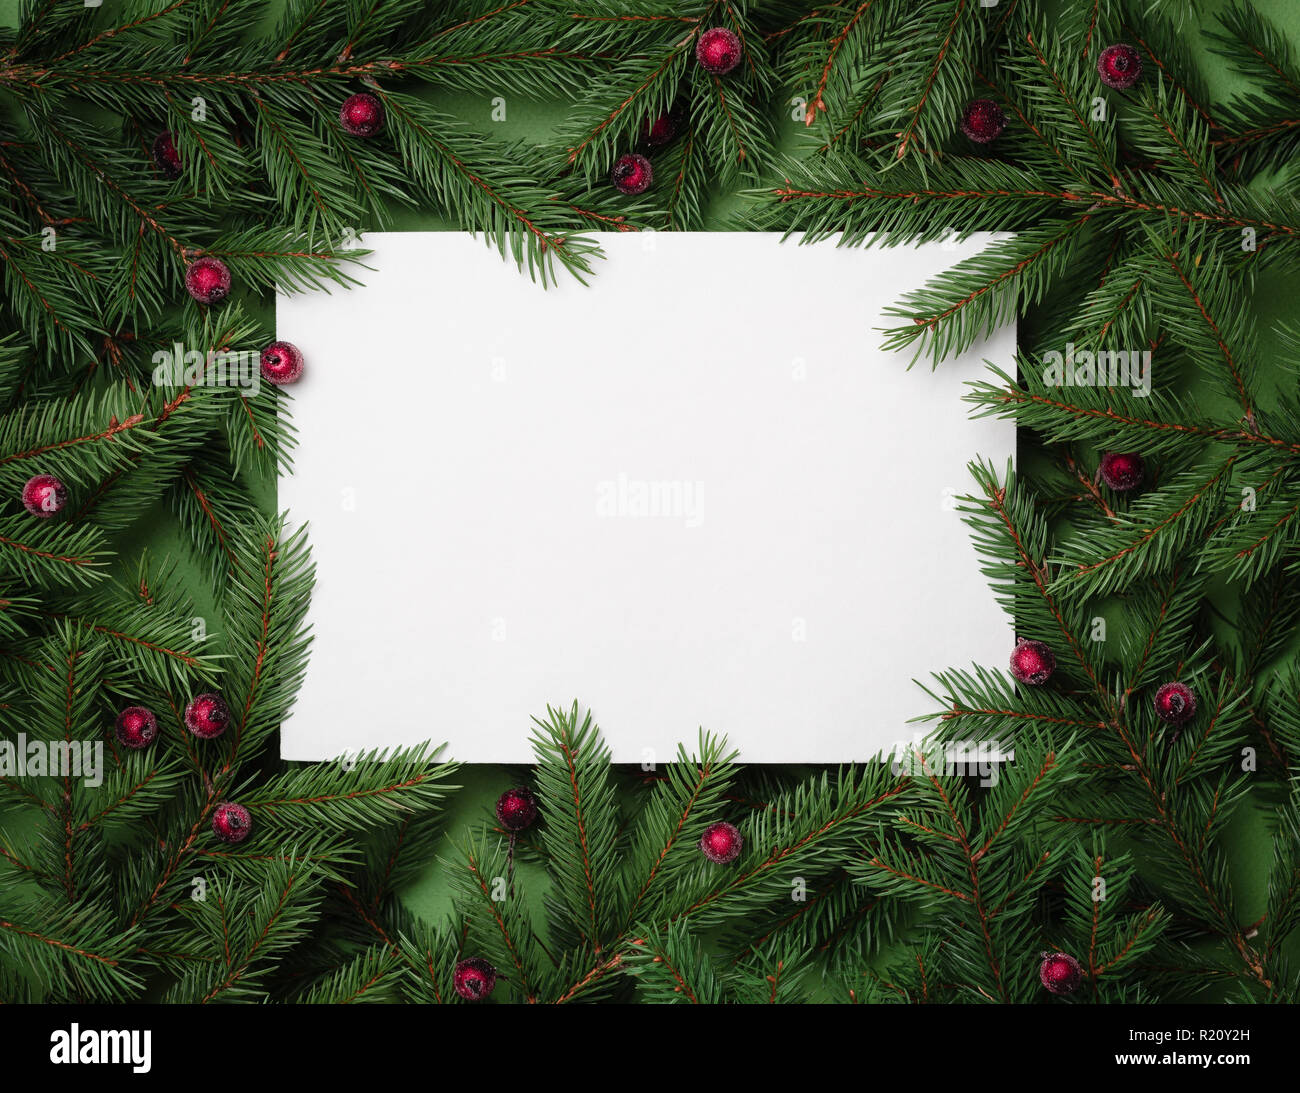 Festive background with copy space for text. Christmas border of fir branches and holly berries. Flat lay, top view Stock Photo